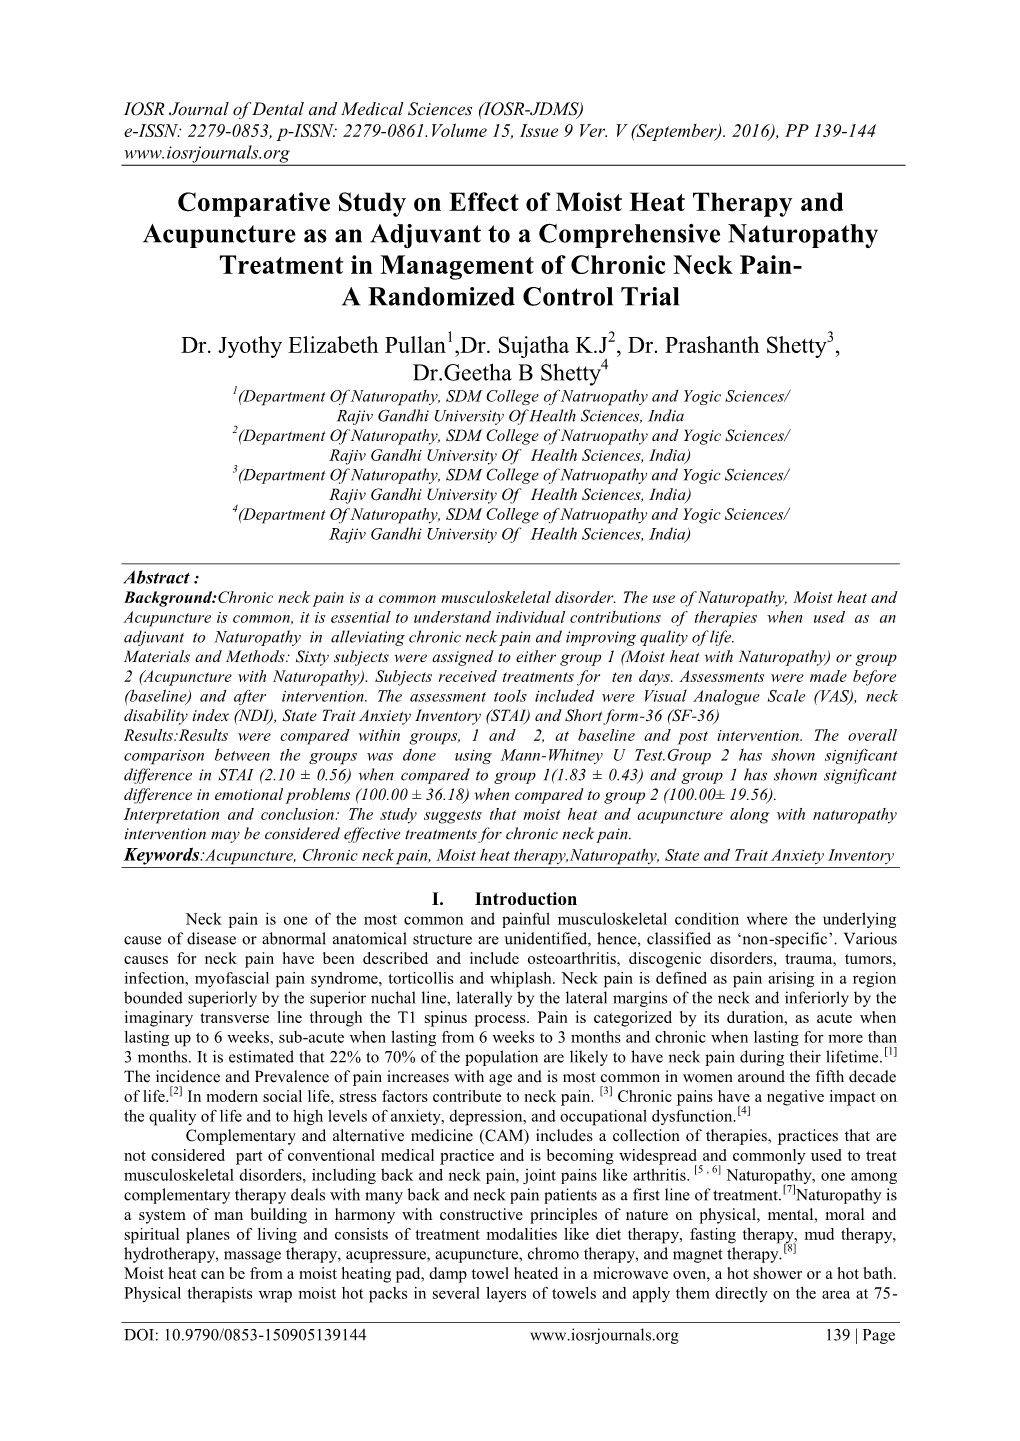 Comparative Study on Effect of Moist Heat Therapy and Acupuncture As an Adjuvant to a Comprehensive Naturopathy Treatment In